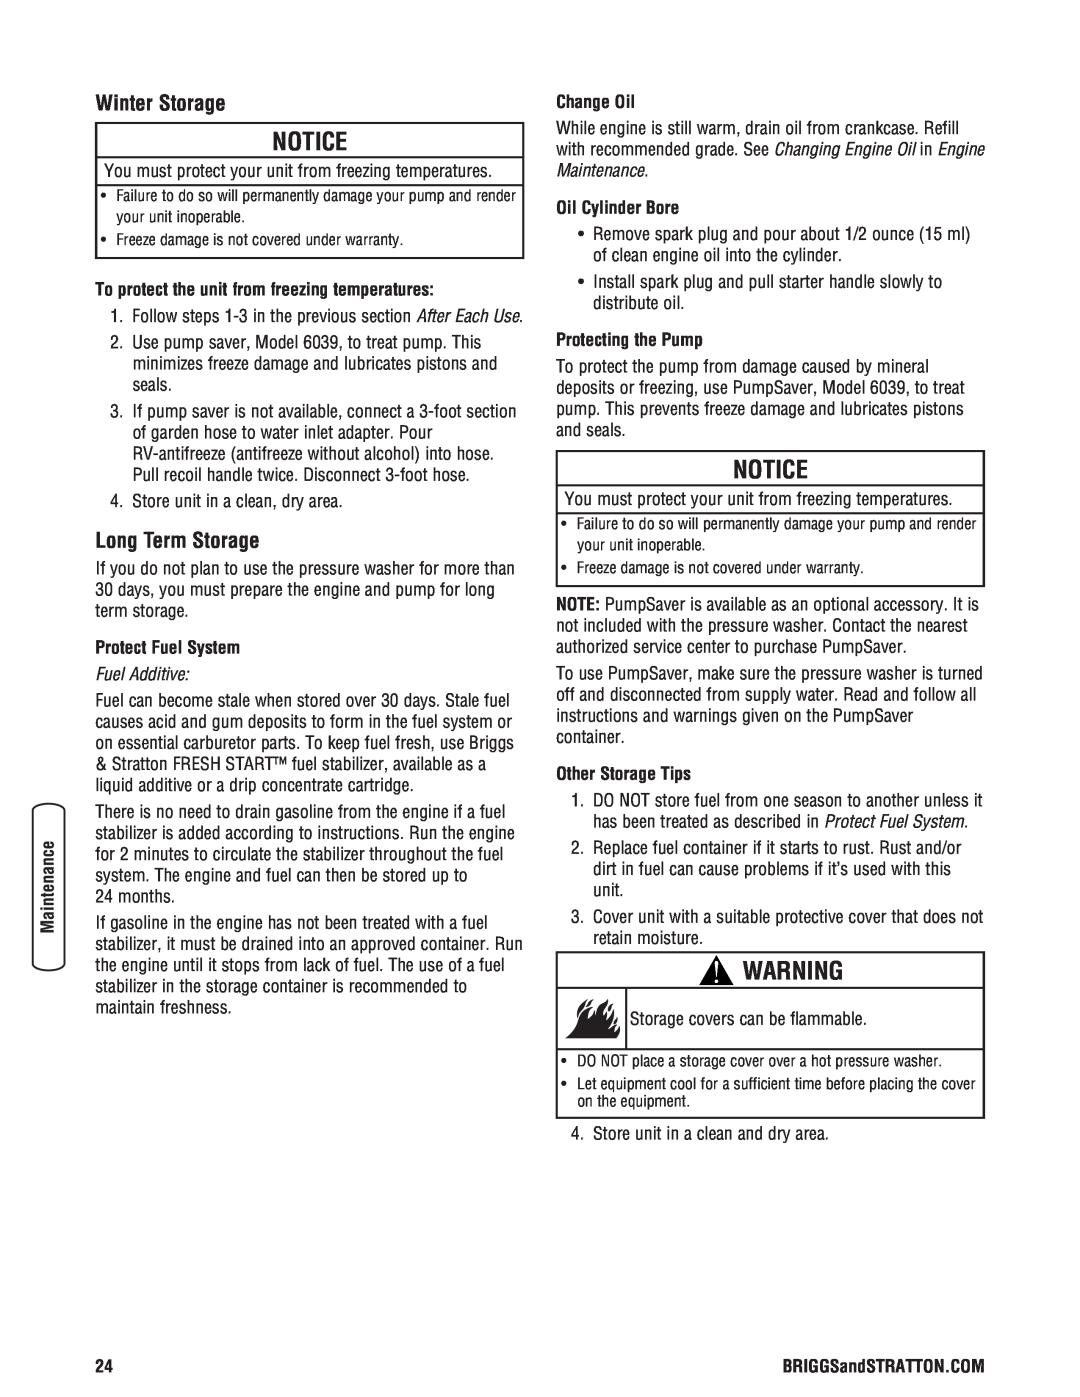 Briggs & Stratton 020364-0 manual Notice, To protect the unit from freezing temperatures, Protect Fuel System, Change Oil 